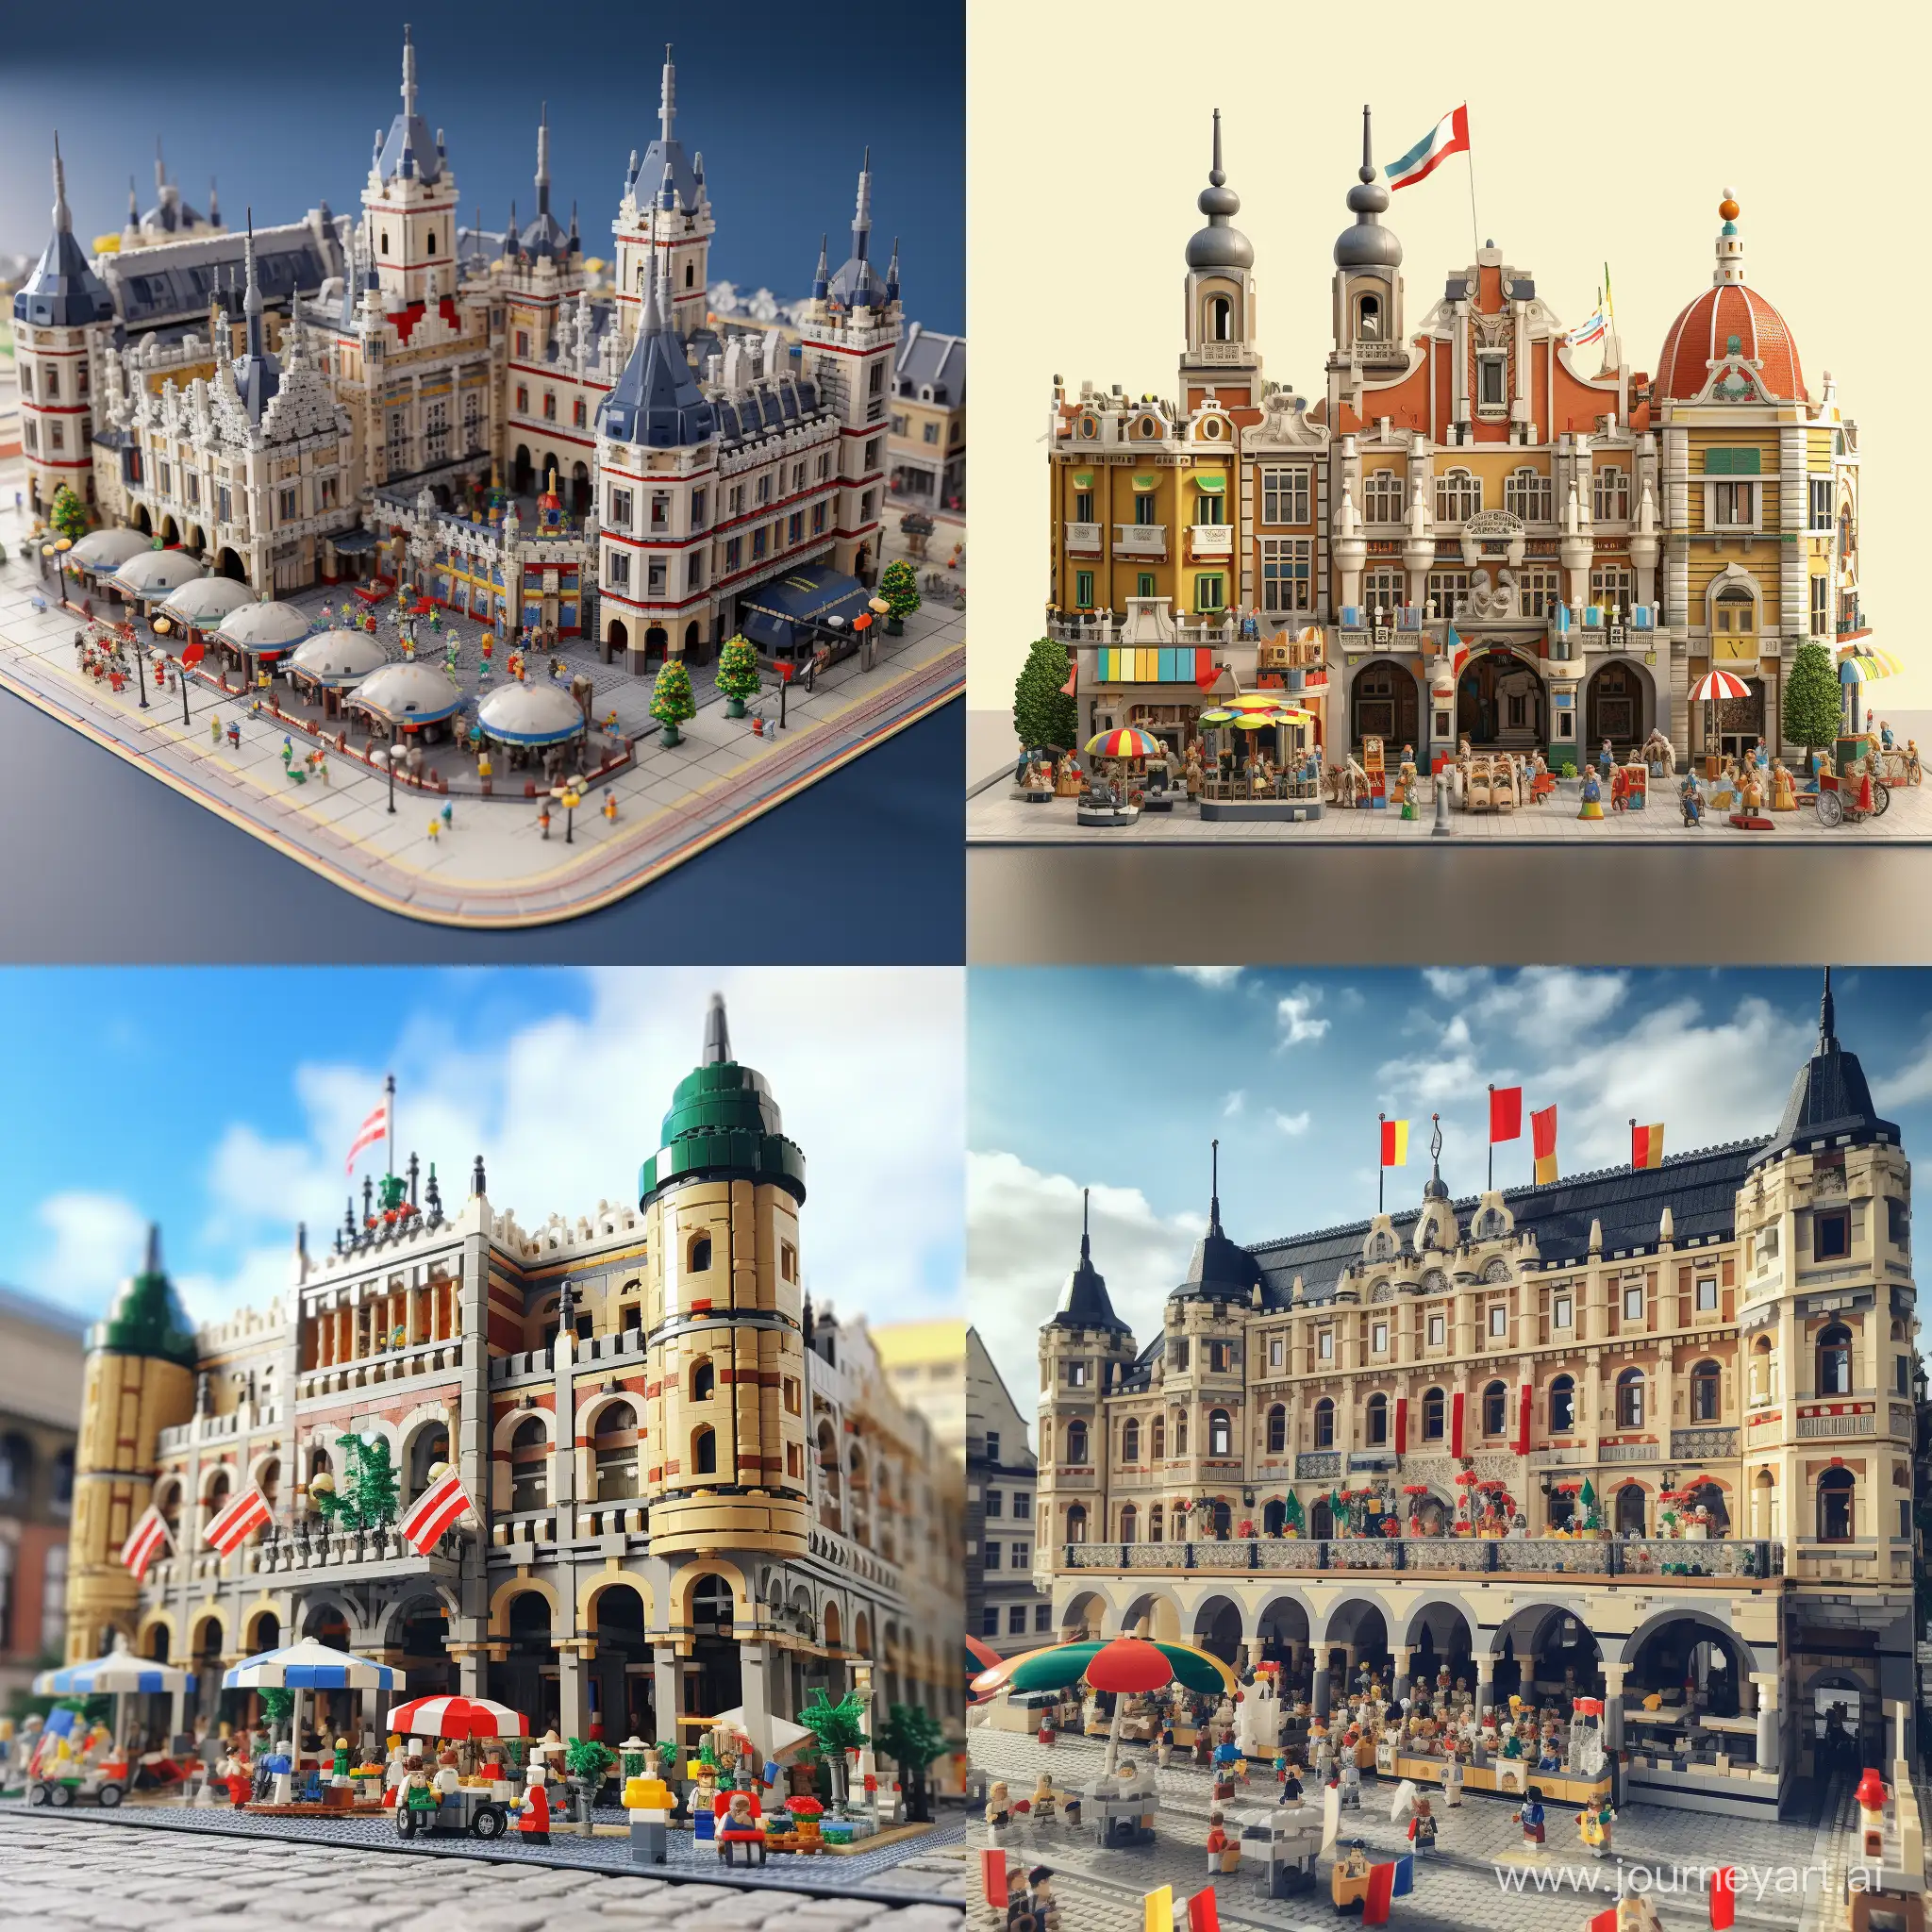 Krakow-Cloth-Hall-Lego-Set-Miniature-Market-Stalls-and-Colorful-Exchanges